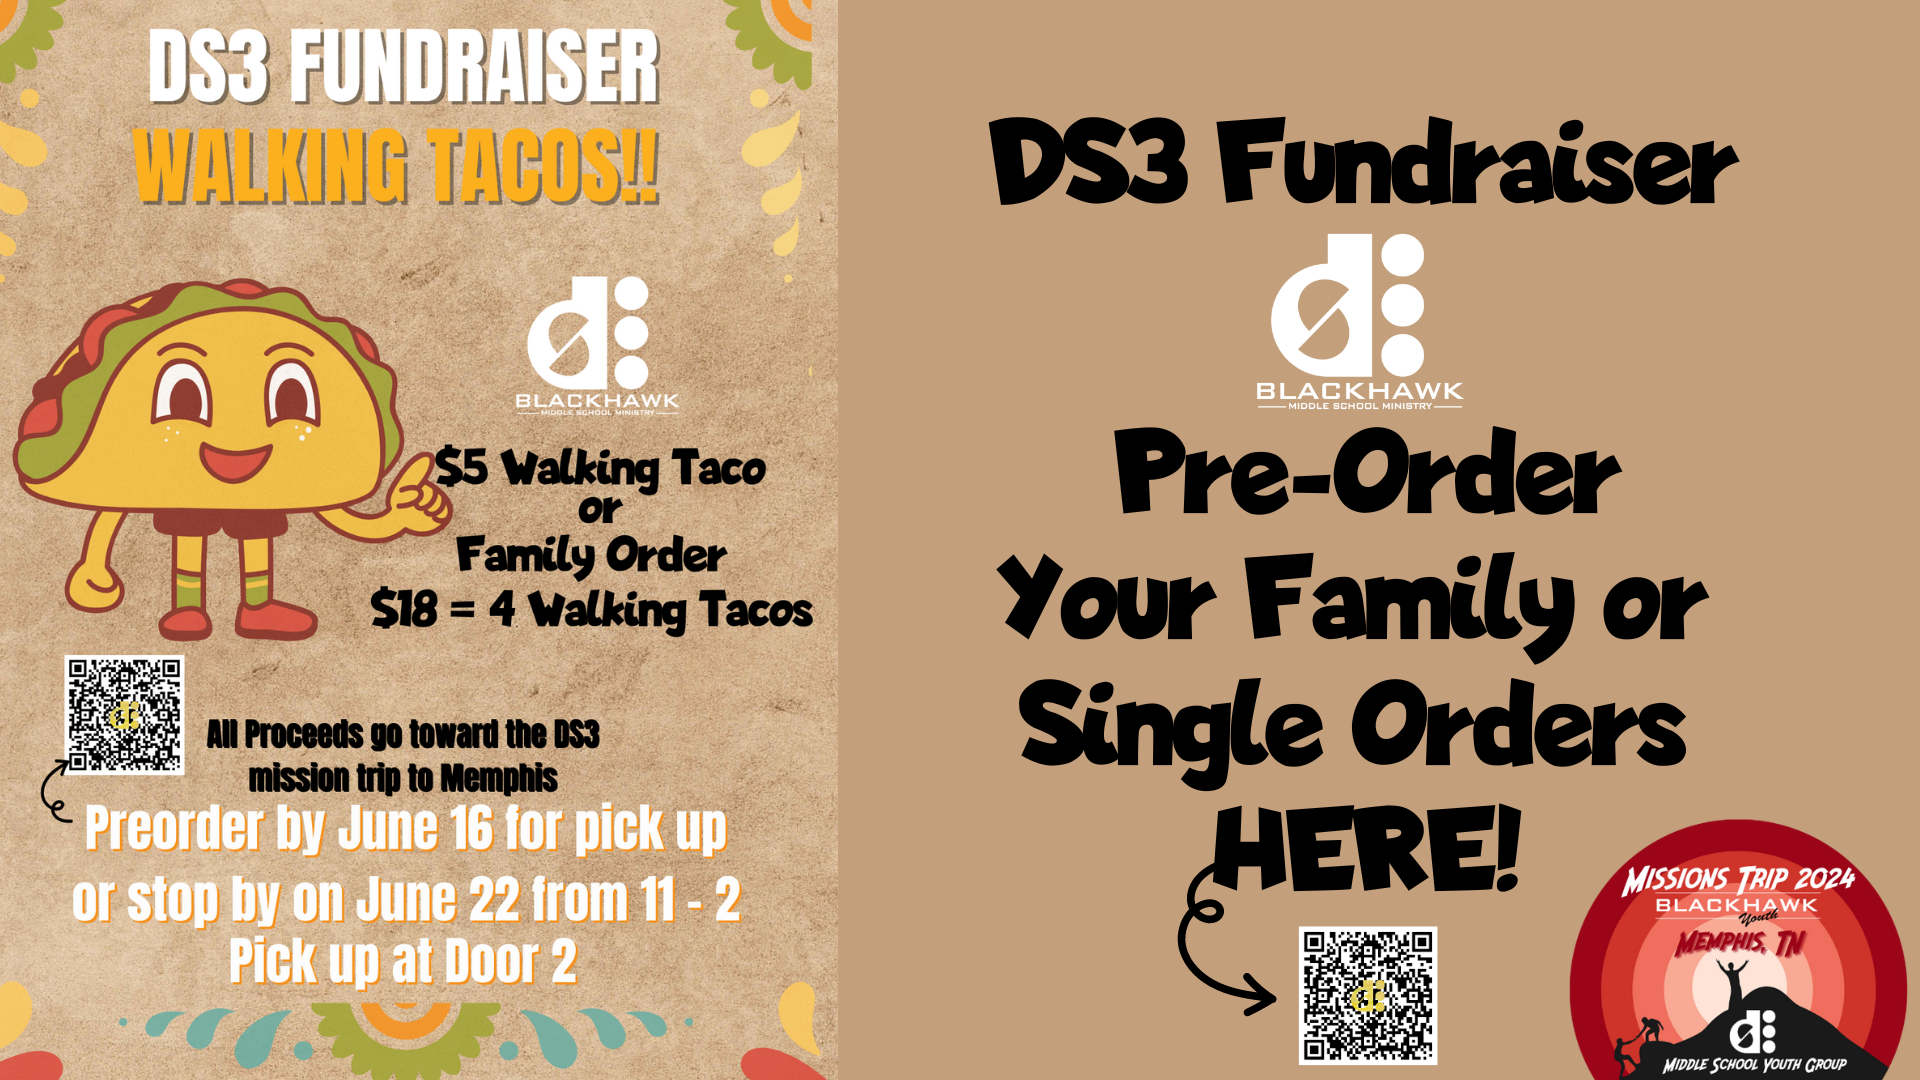 DS3 Walking Taco Mission Team Fundraiser